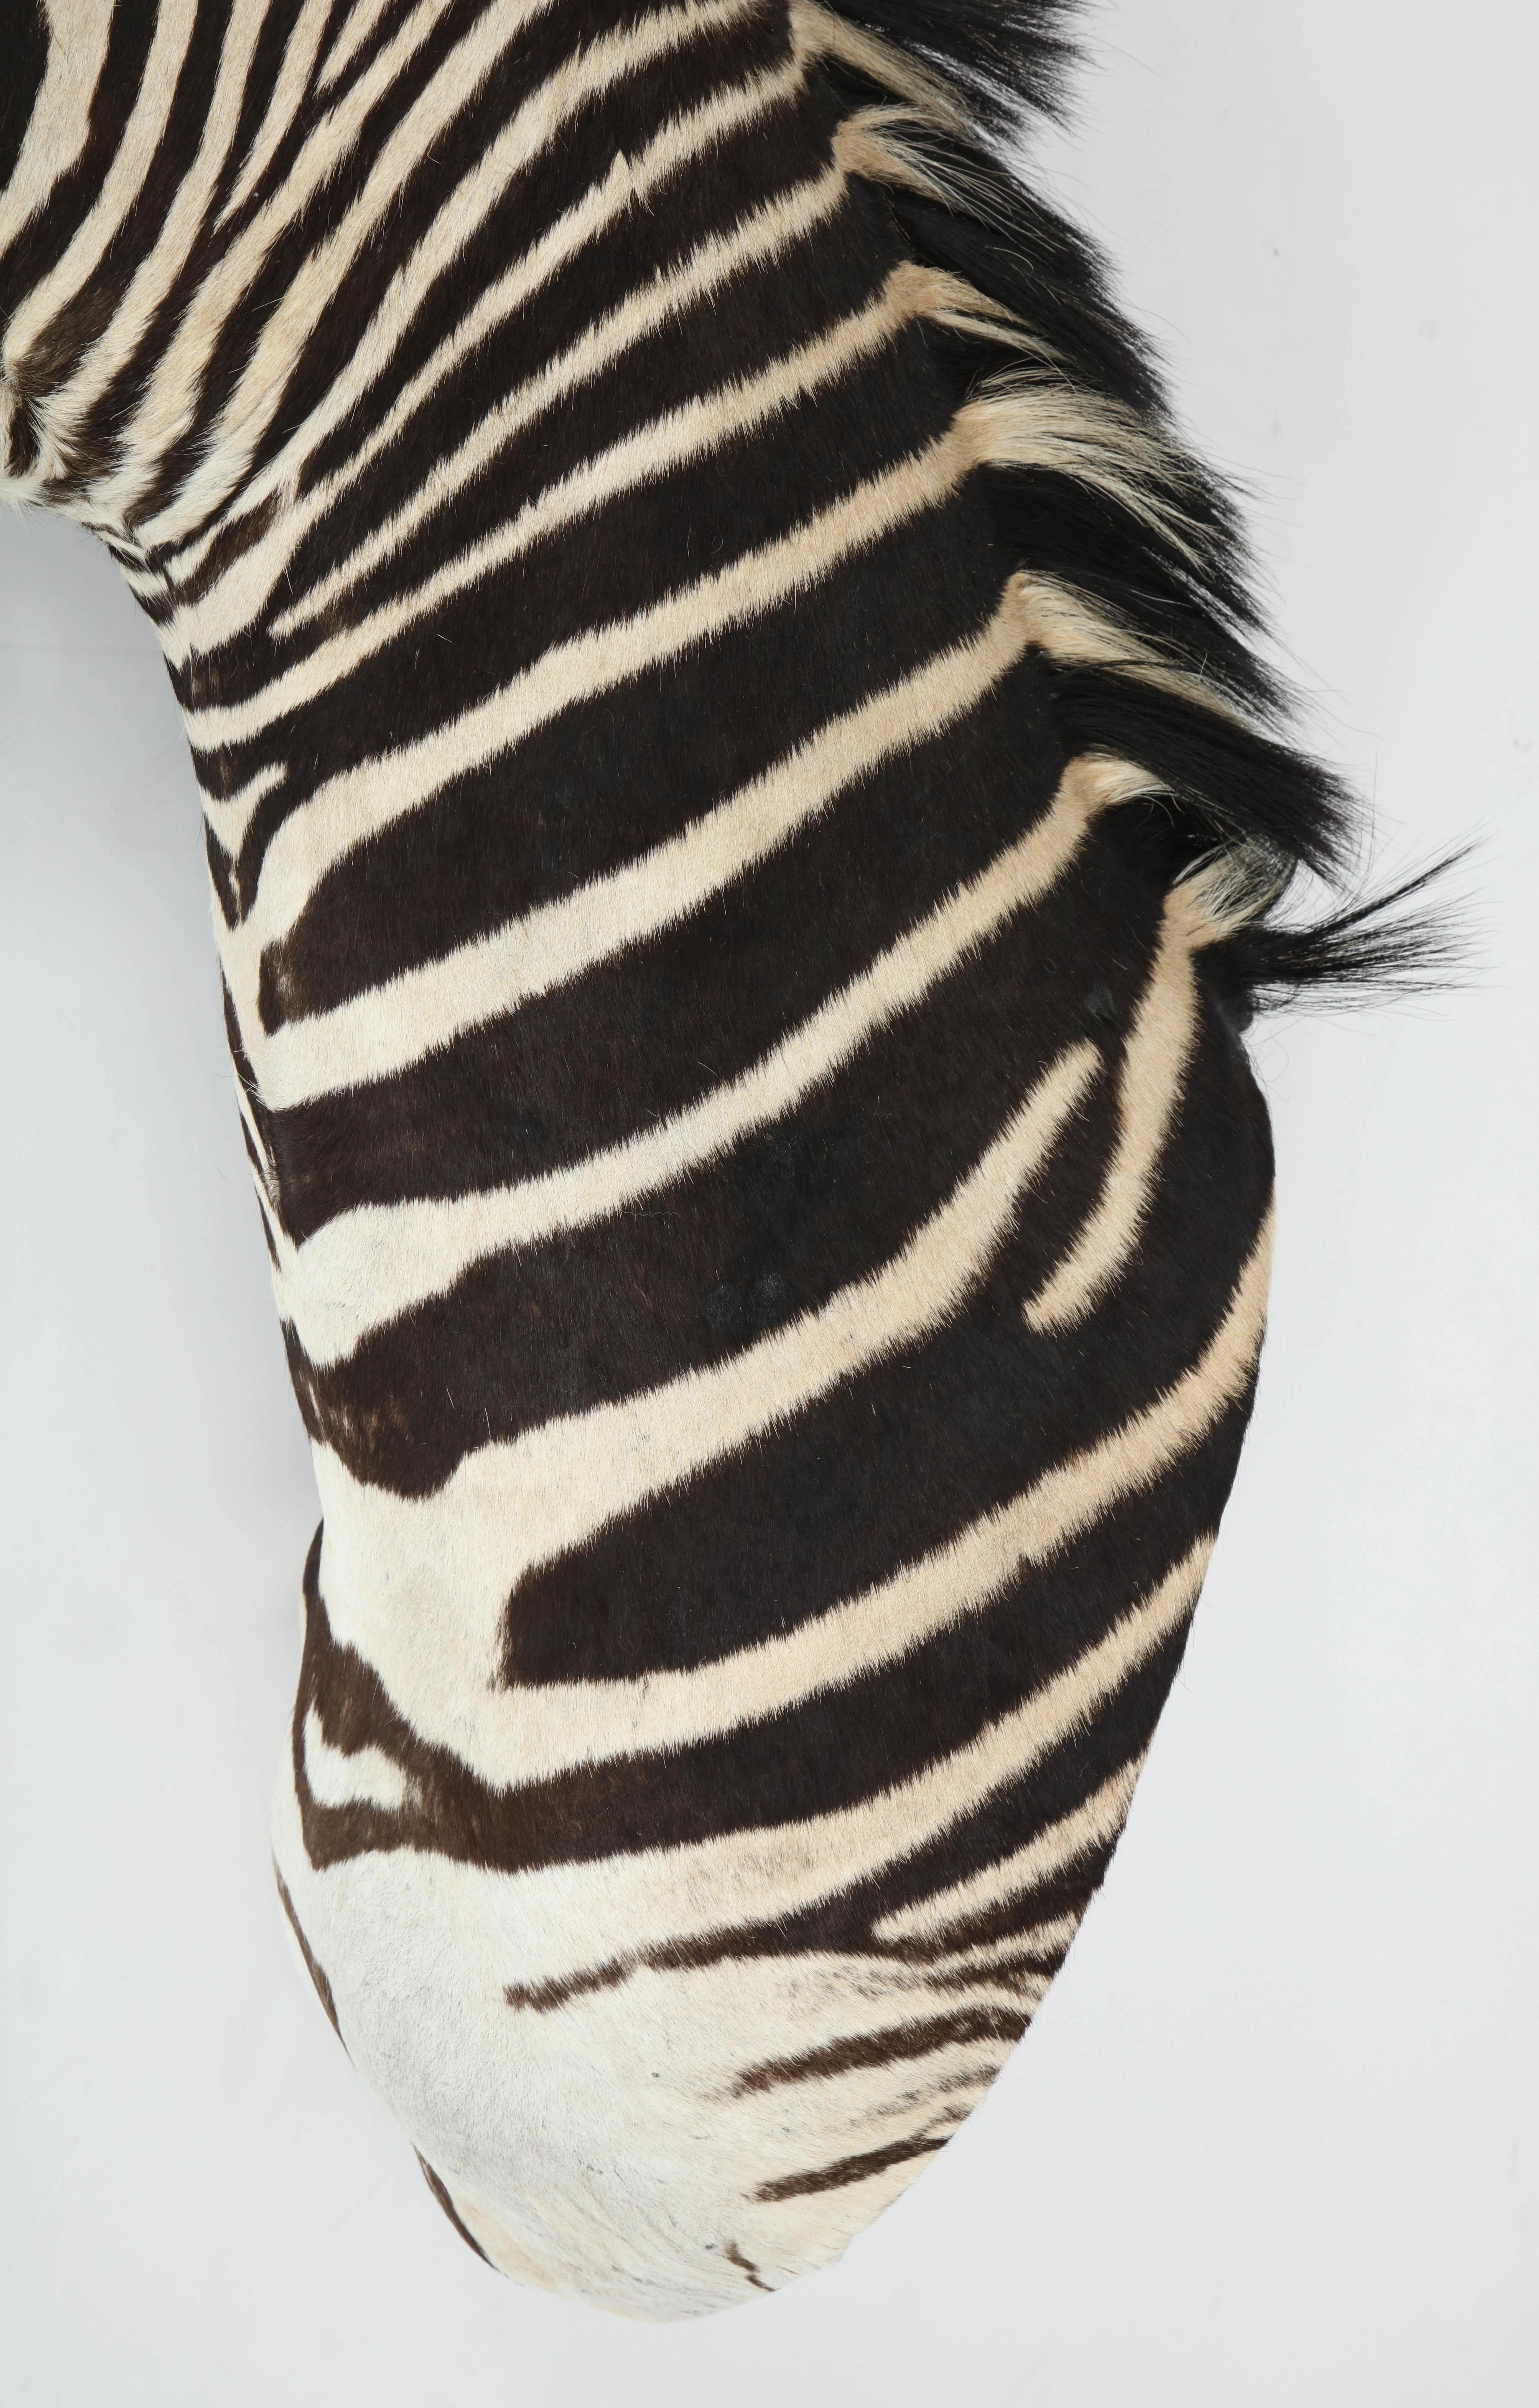 Hand-Crafted Zebra Taxidermy, Chocolate and White